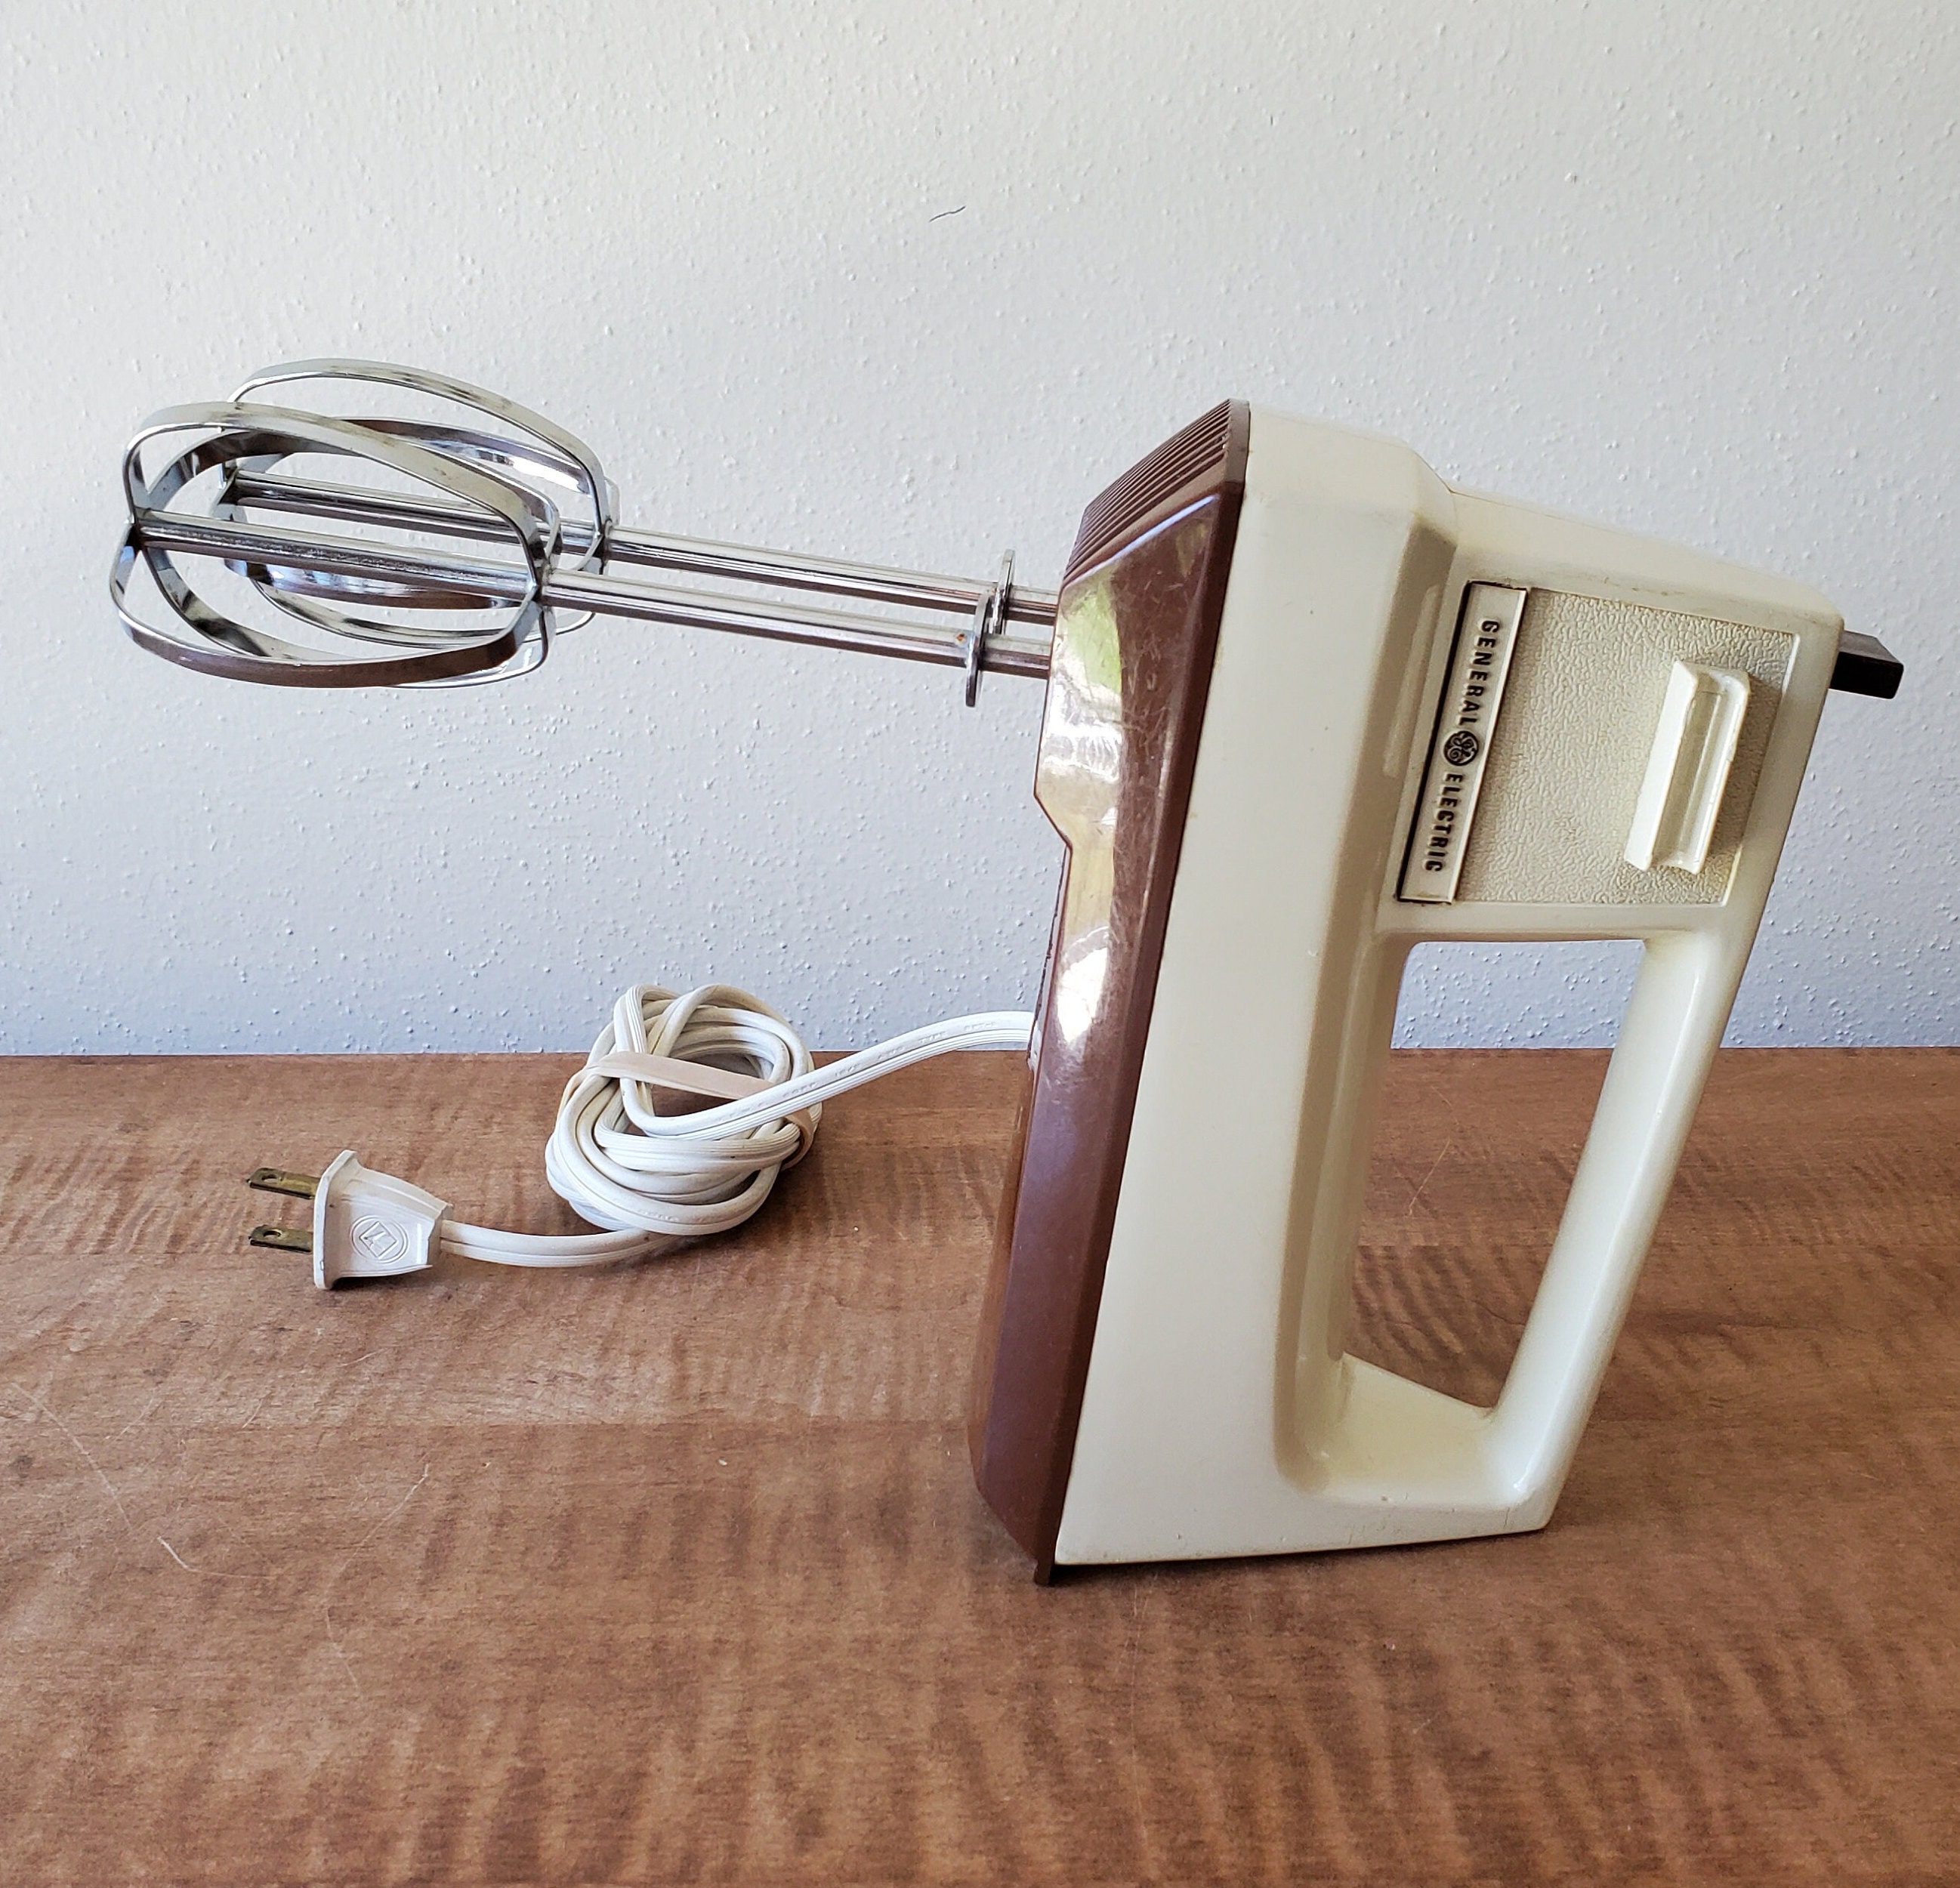 Vintage Electric Hand Mixer, For Rent in North Hollywood